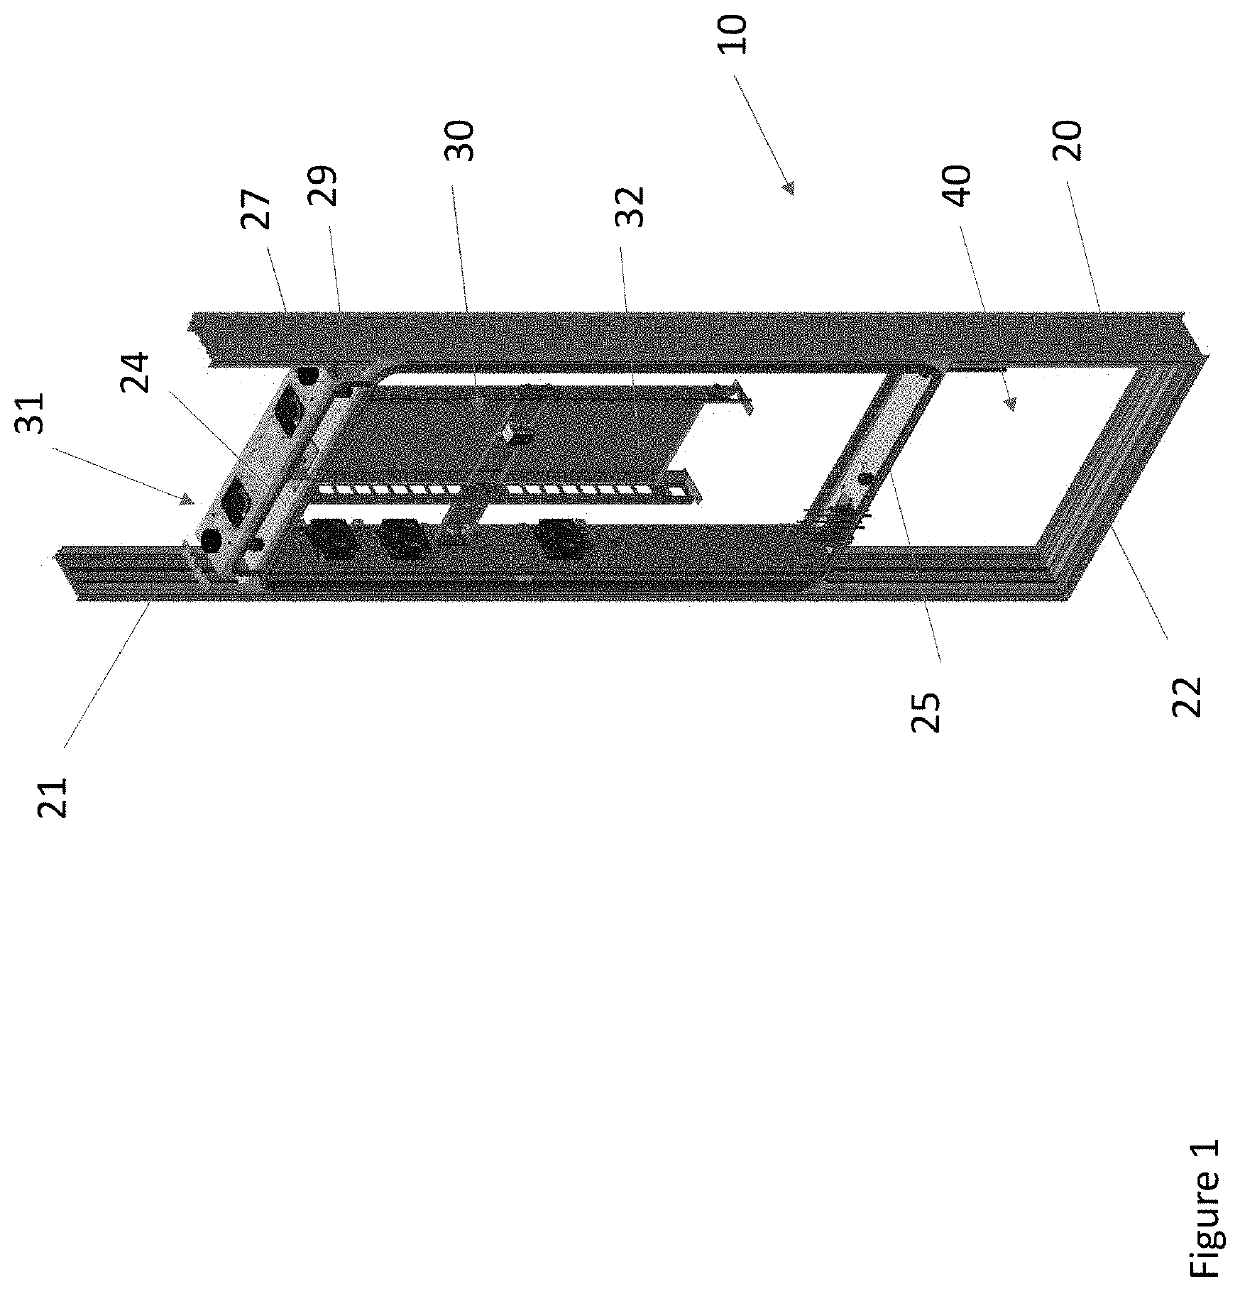 Housing assembly for an integrated display unit